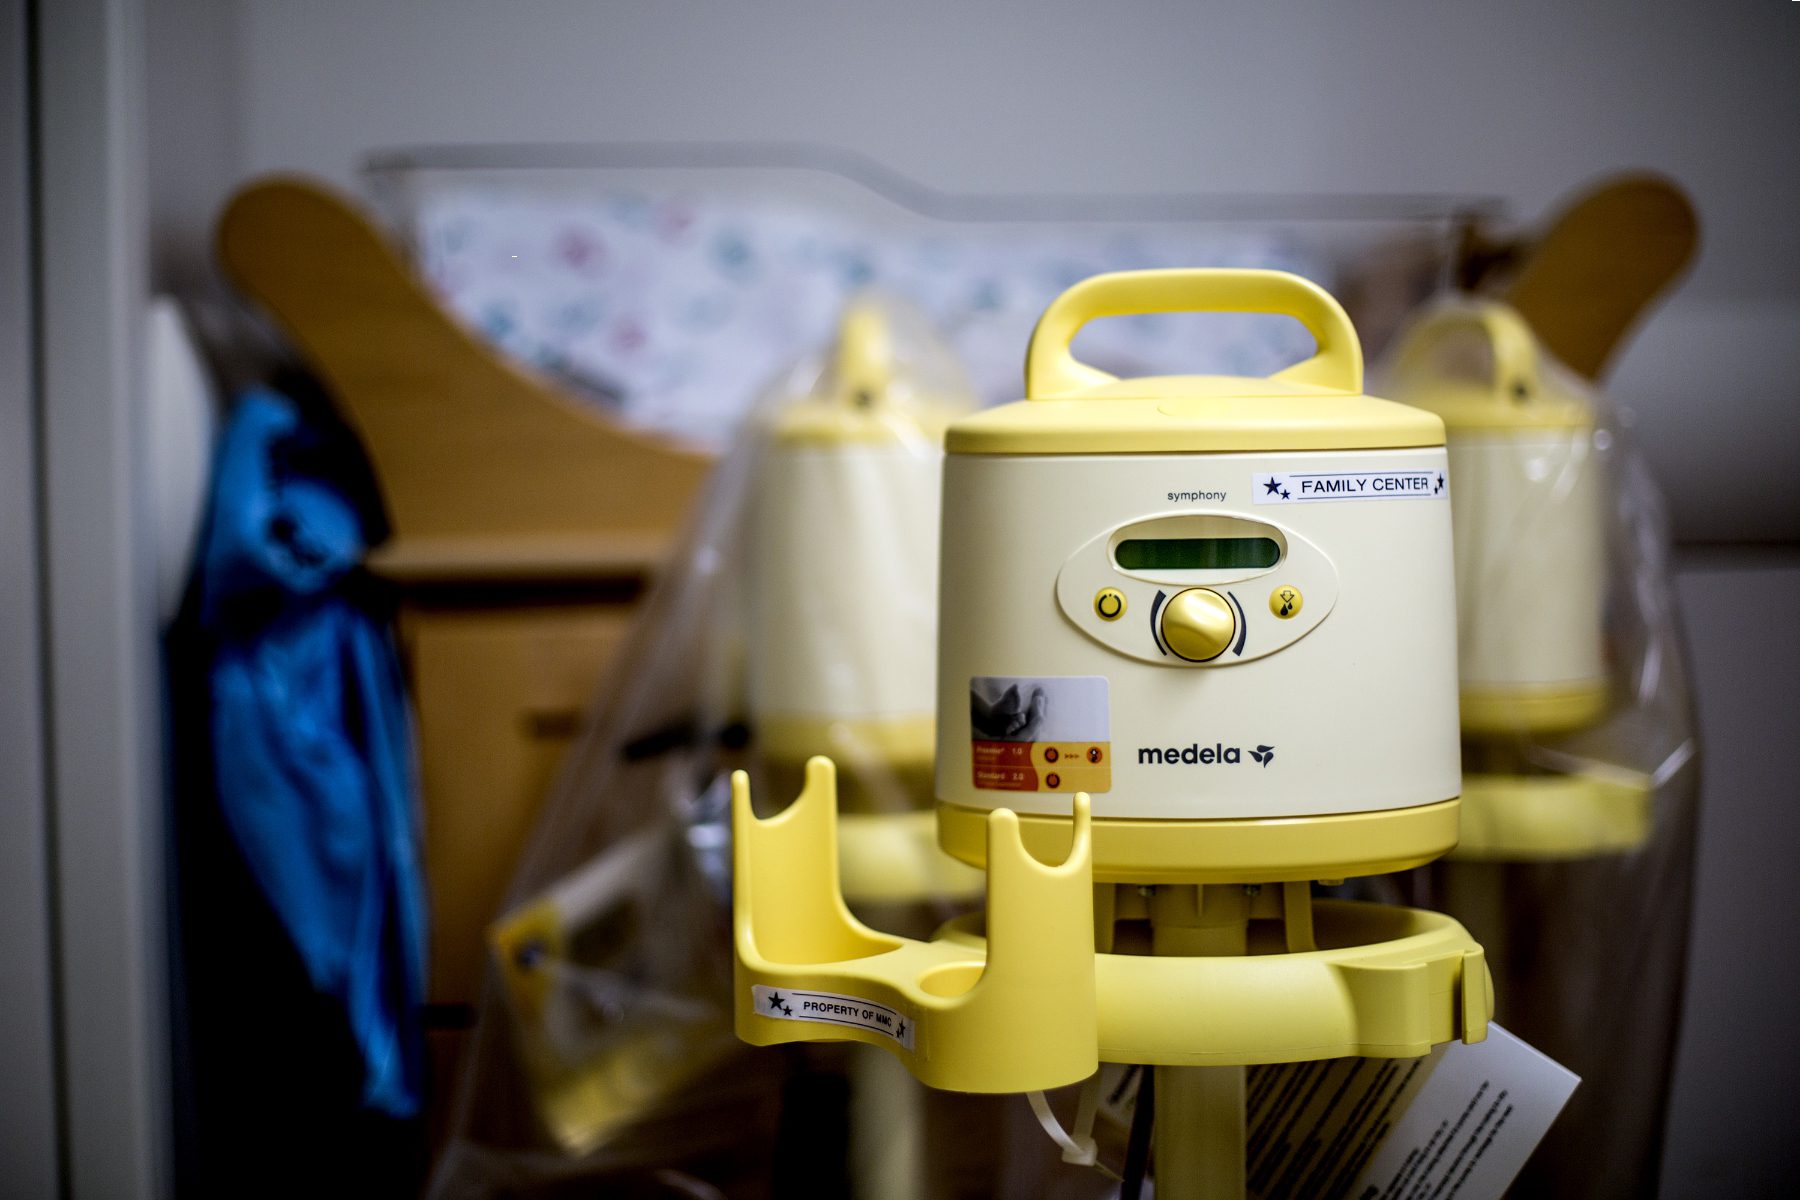 A yellow Medela breast pump at Maine Medical Center from May 2016